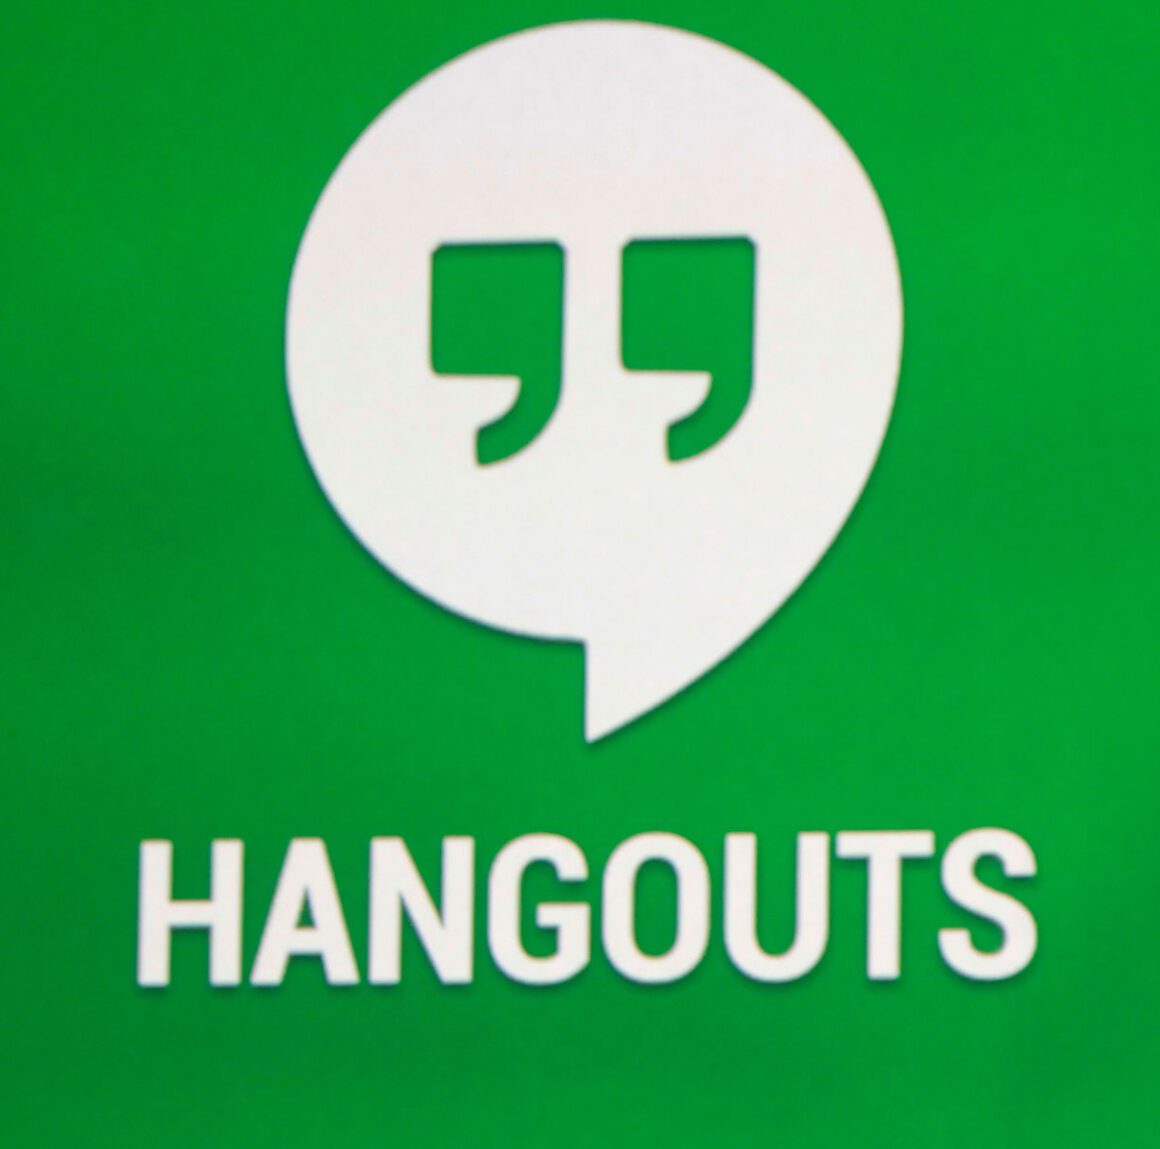 [APK Download] Google Hangouts v5.1 is rolling-out with updated UI and ...